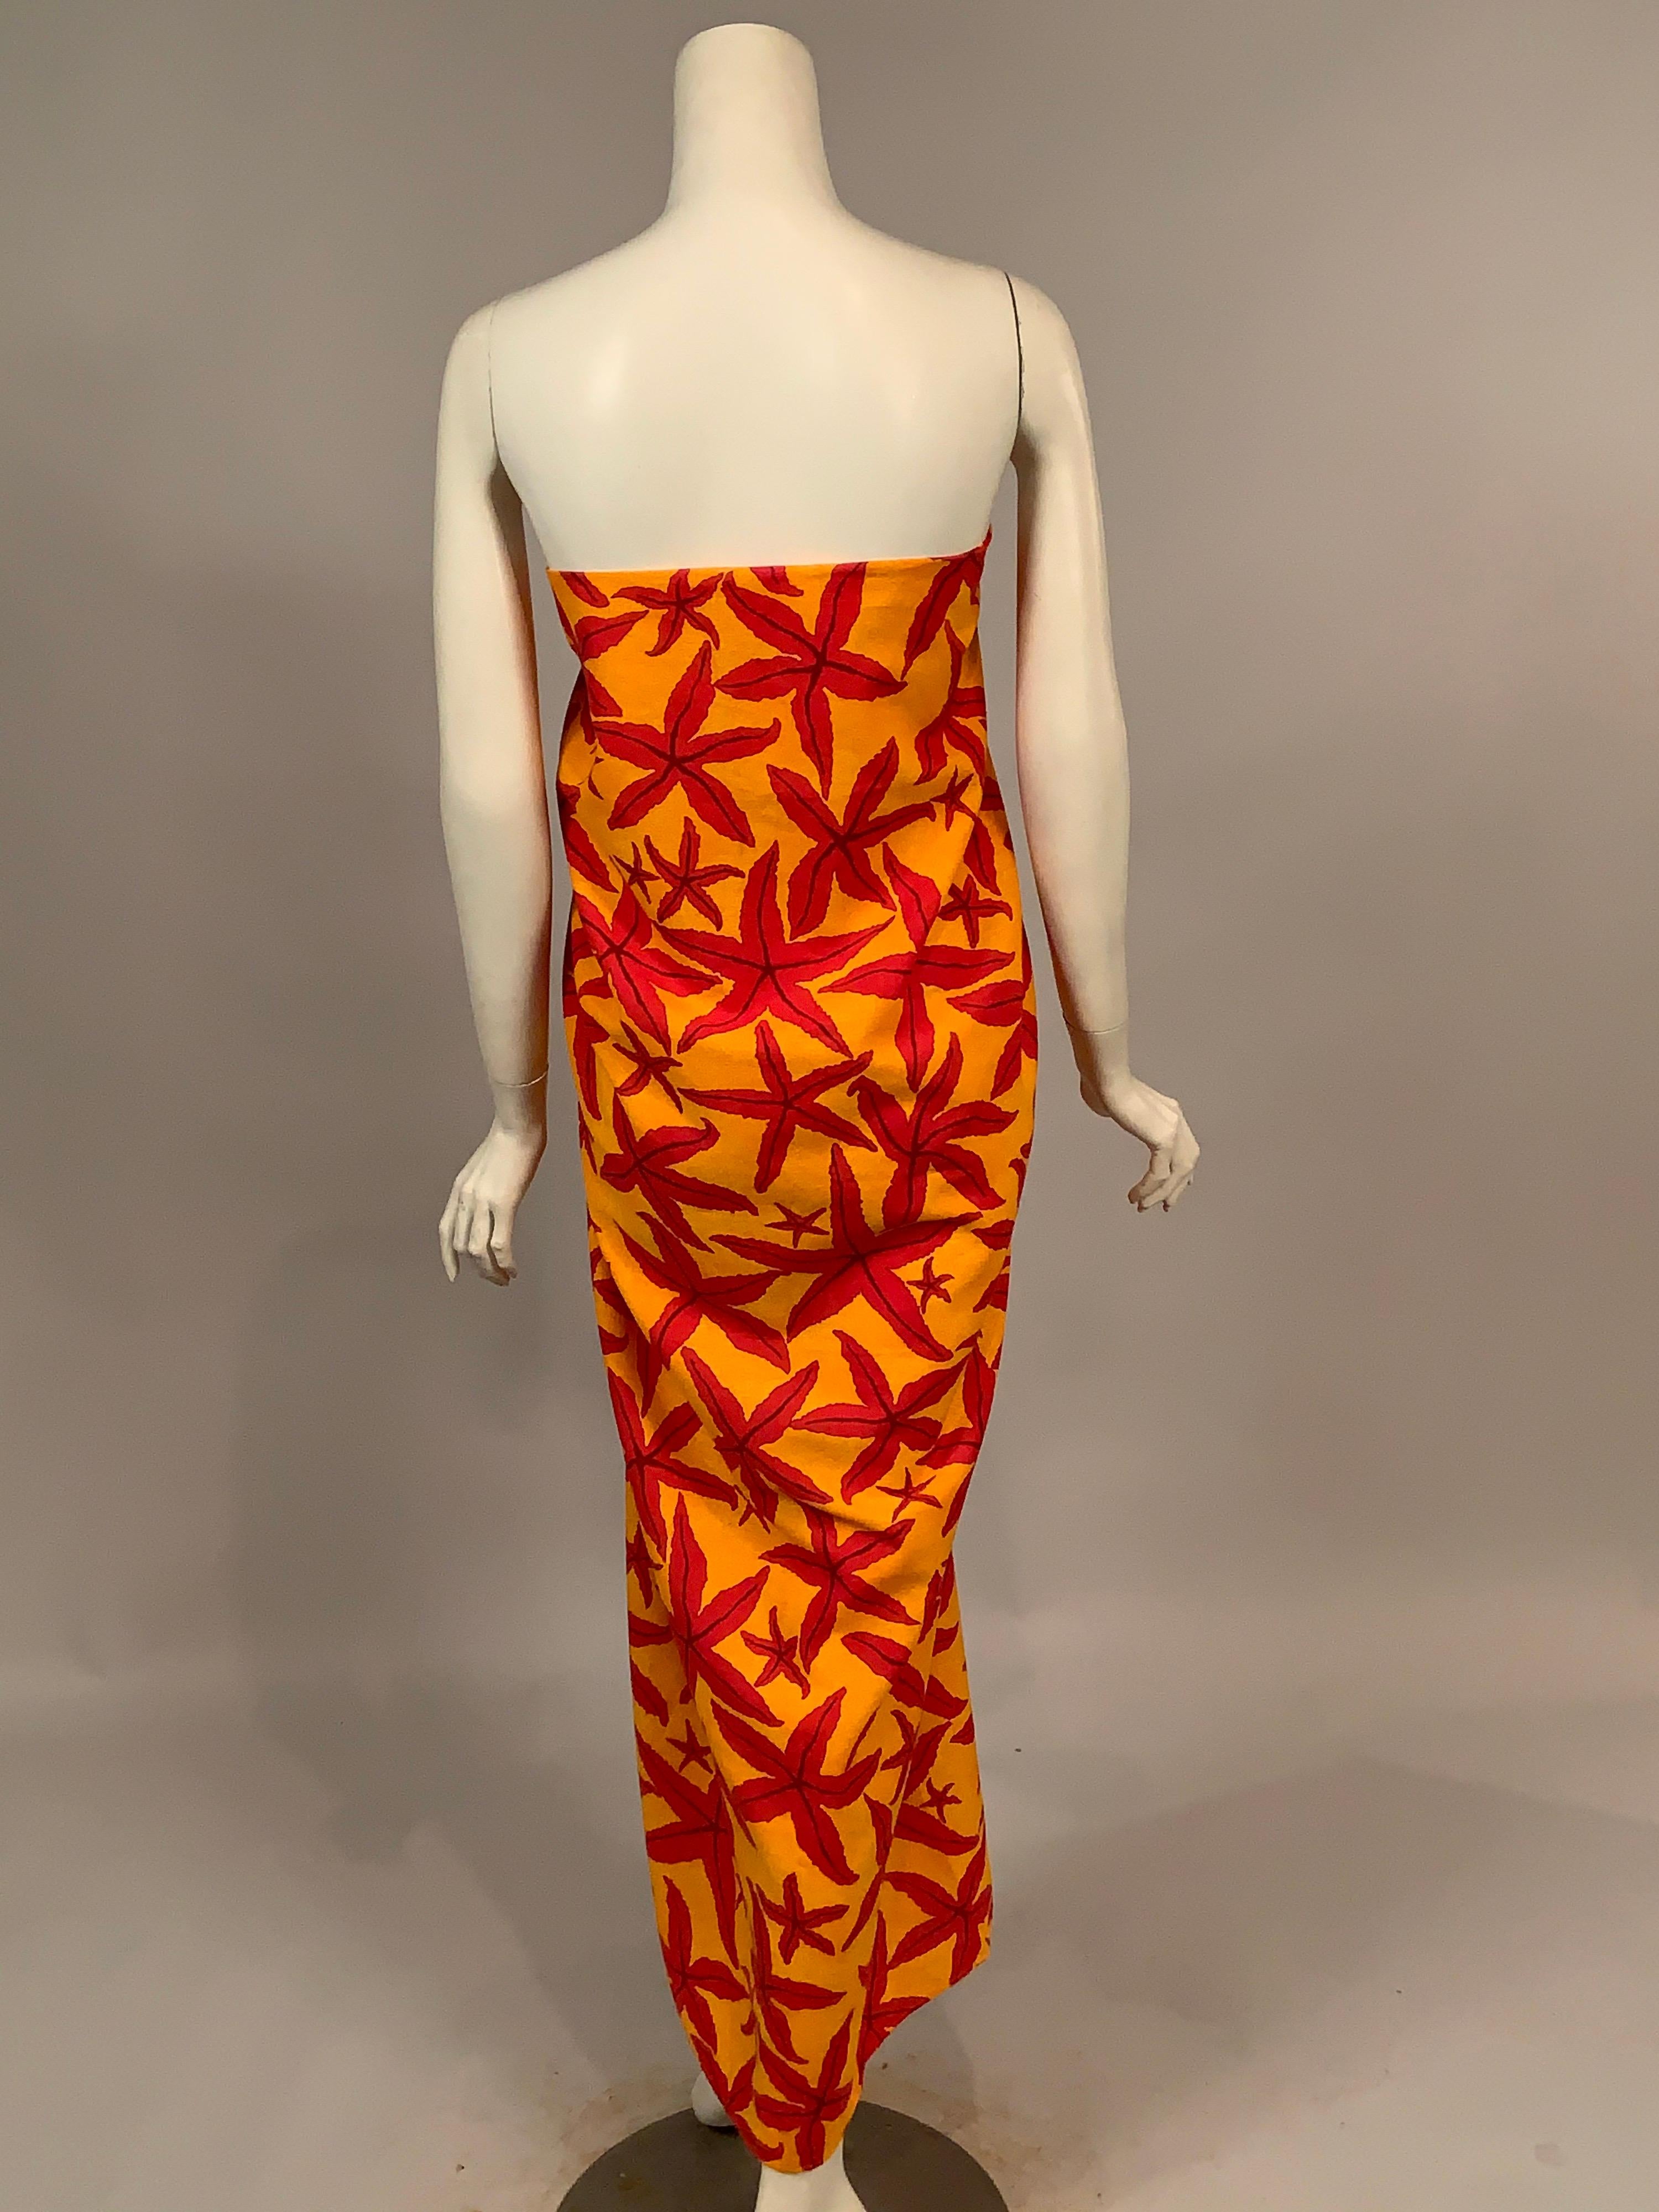 Women's Hermes, Paris Tropical Starfish Patterned Red and Yellow Pareo, Wrap or Shawl